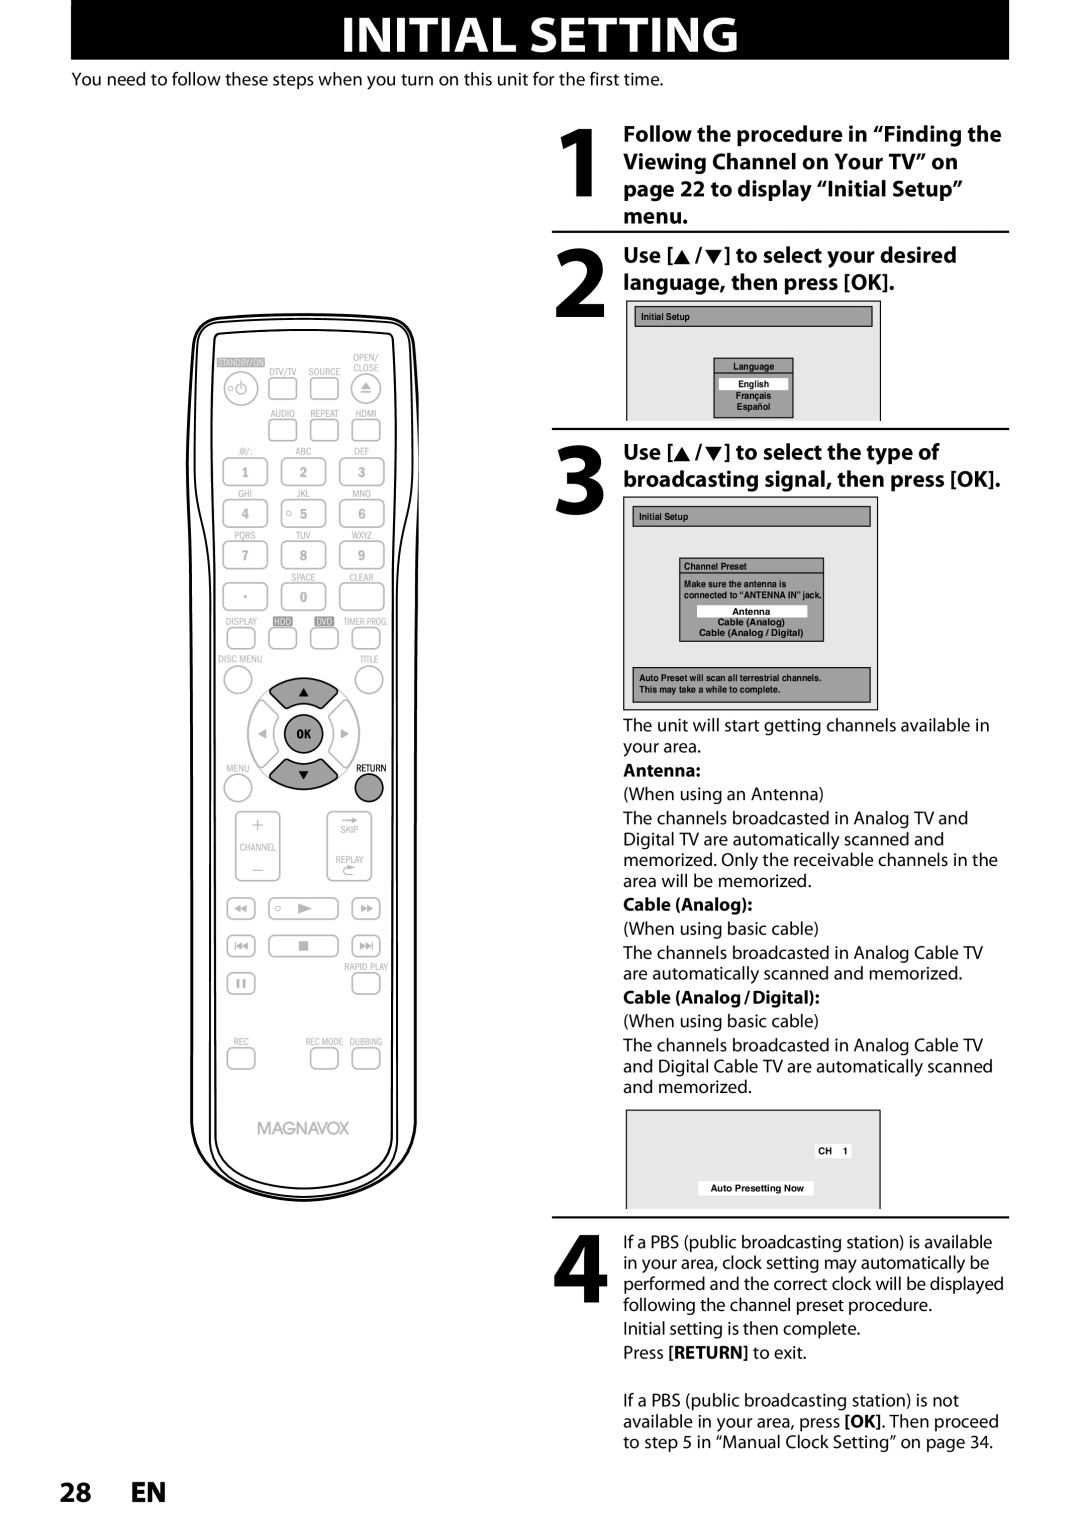 Magnavox MDR535H Initial Setting, 28 EN, Follow the procedure in “Finding the, Use K / L to select your desired, language 